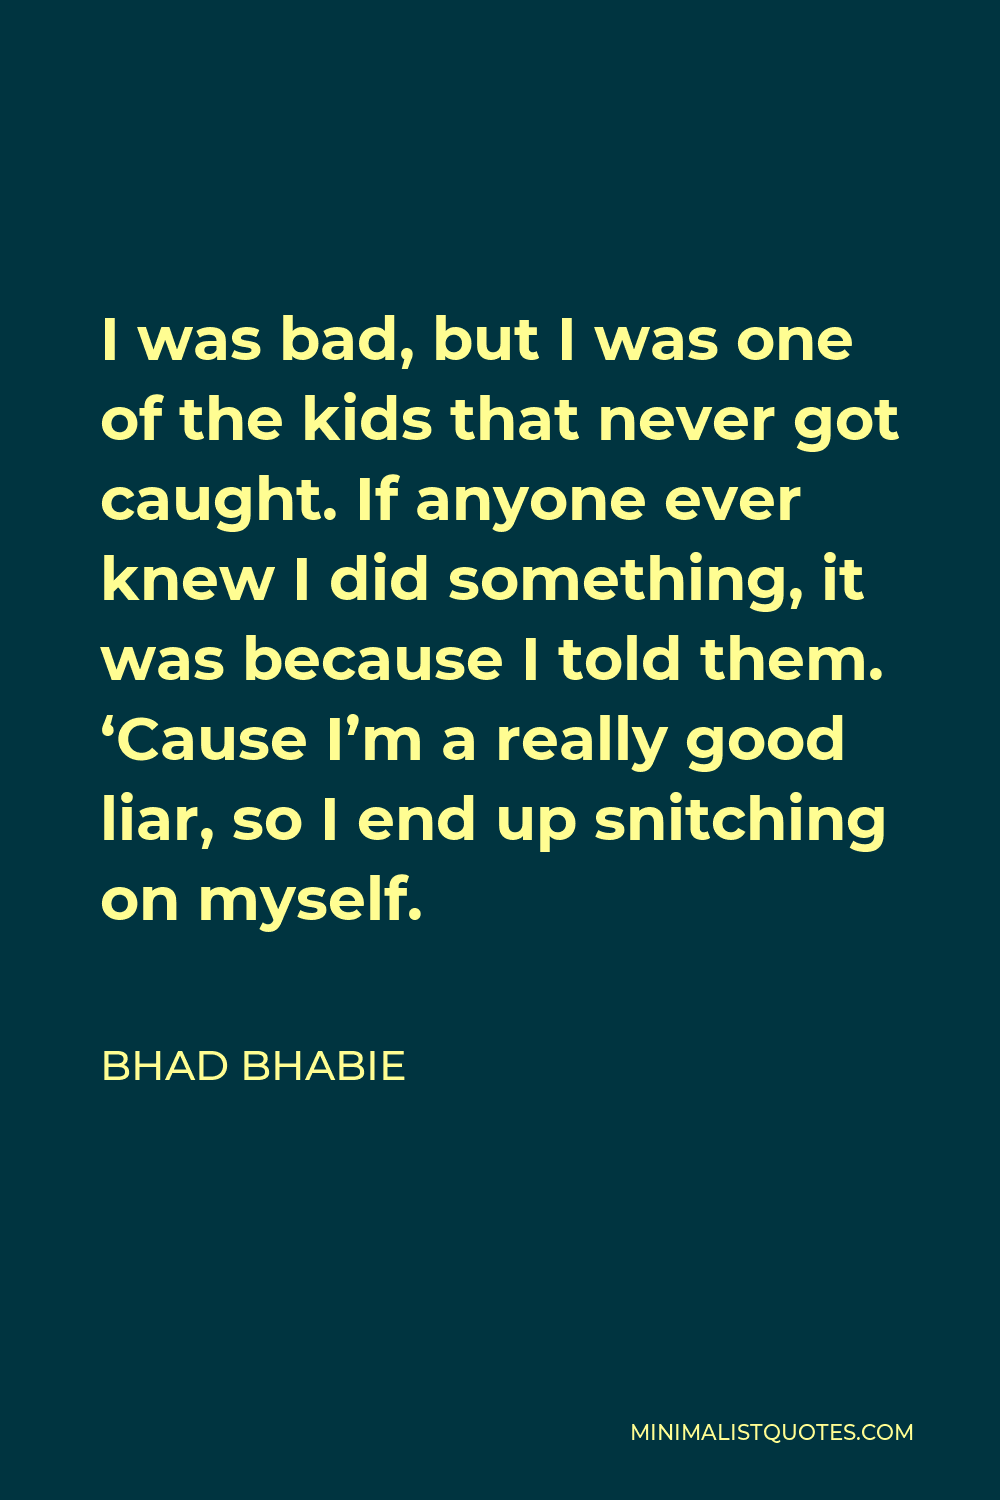 Bhad Bhabie Quote - I was bad, but I was one of the kids that never got caught. If anyone ever knew I did something, it was because I told them. ‘Cause I’m a really good liar, so I end up snitching on myself.